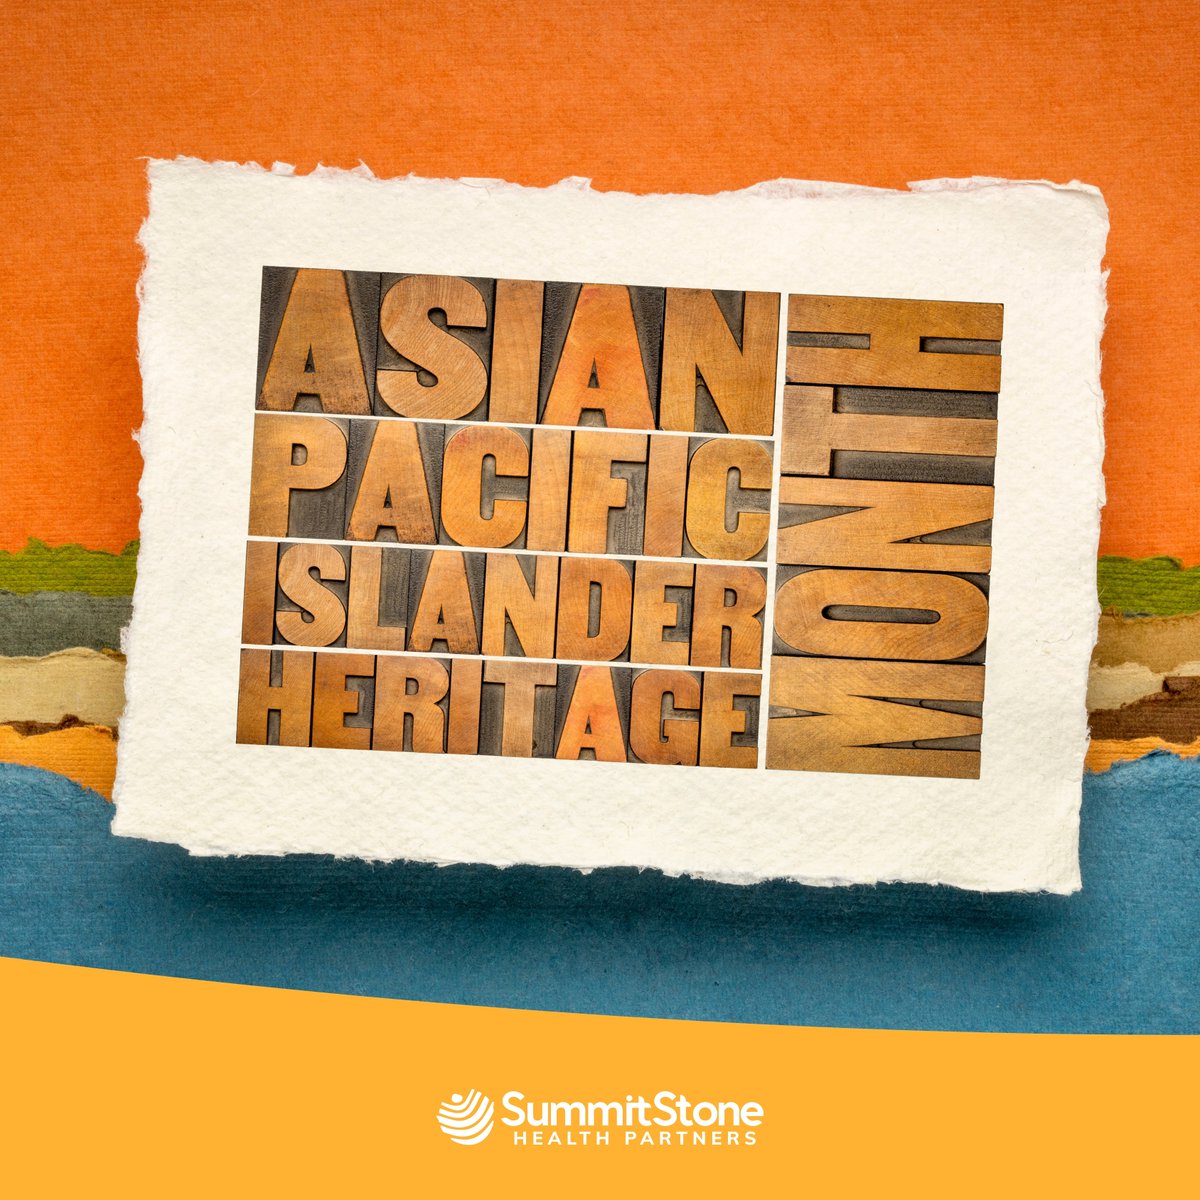 May is #AsianAmericanPacificIslanderHeritageMonth! #AAPI populations represent over 30 countries & ethnic groups & speak over 100 different languages. Celebrate the experiences, achievements, & perspectives of #AsianAmericans & #PacificIslanders. asianpacificheritage.gov.